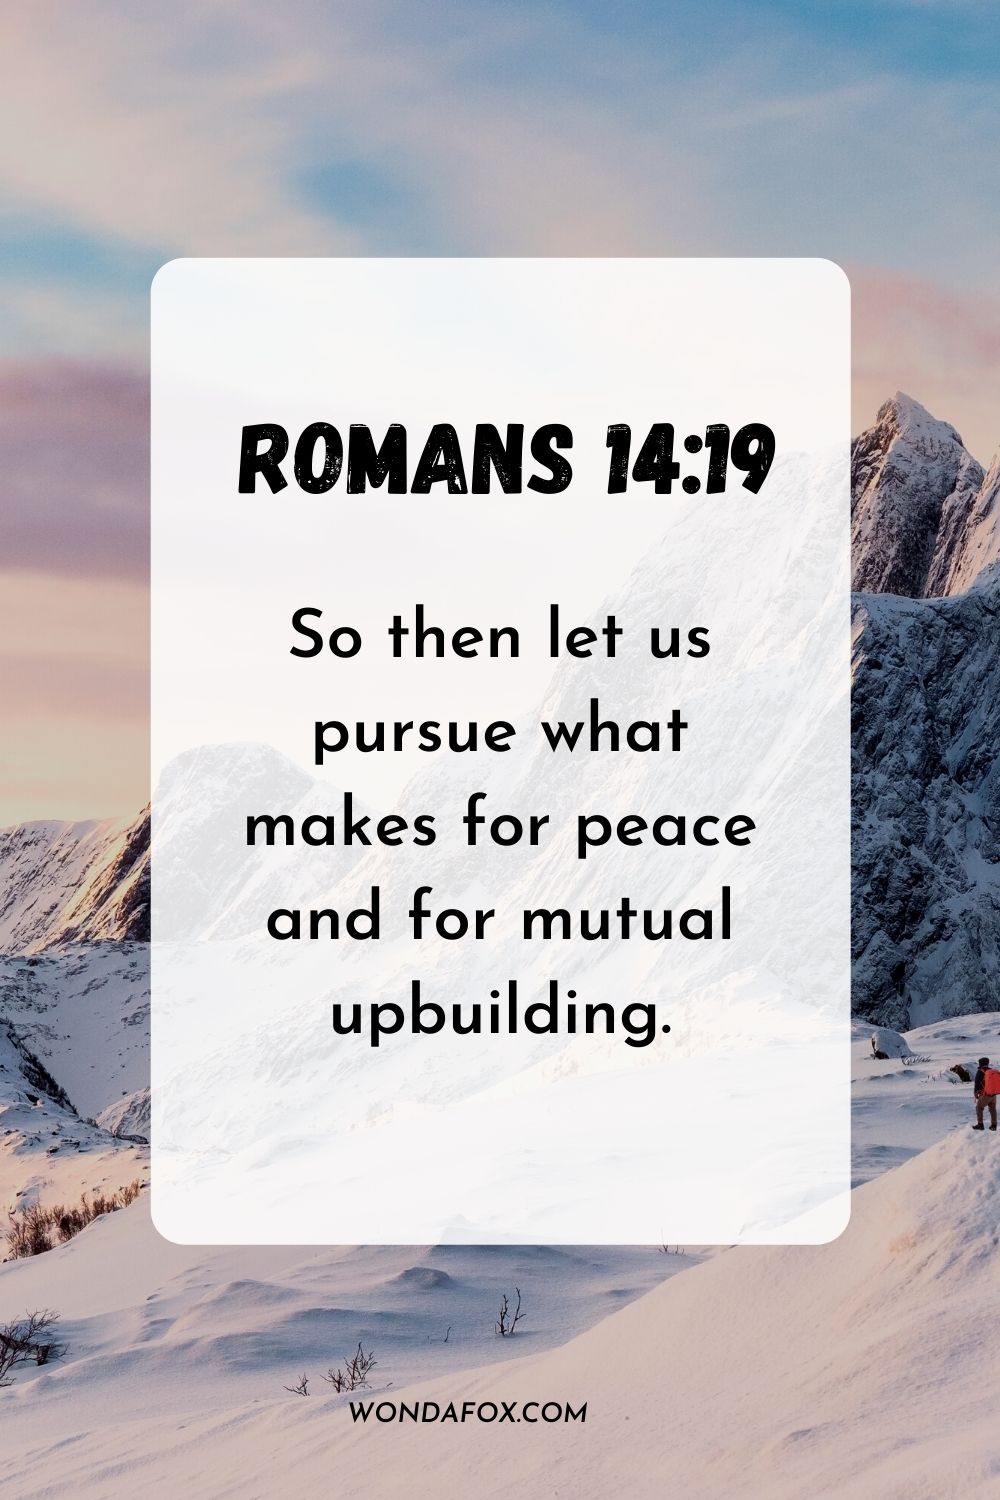 So then let us pursue what makes for peace and for mutual upbuilding. Romans 14:19